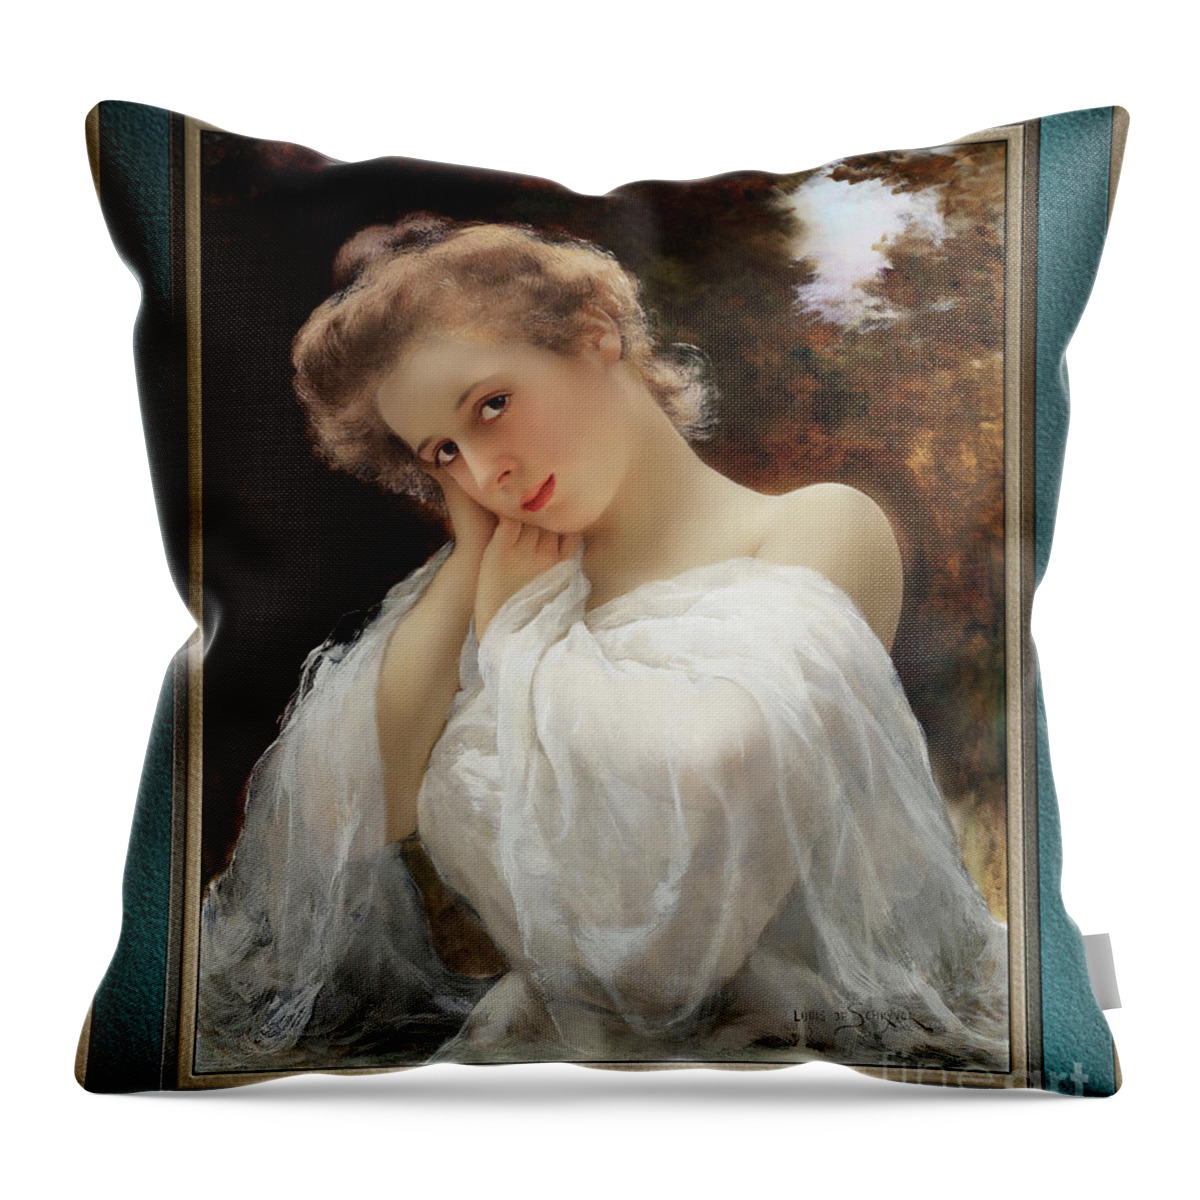 The Dreamer Throw Pillow featuring the painting The Dreamer by Louis Marie de Schryver Remastered Xzendor7 Fine Art Classical Reproductions by Rolando Burbon